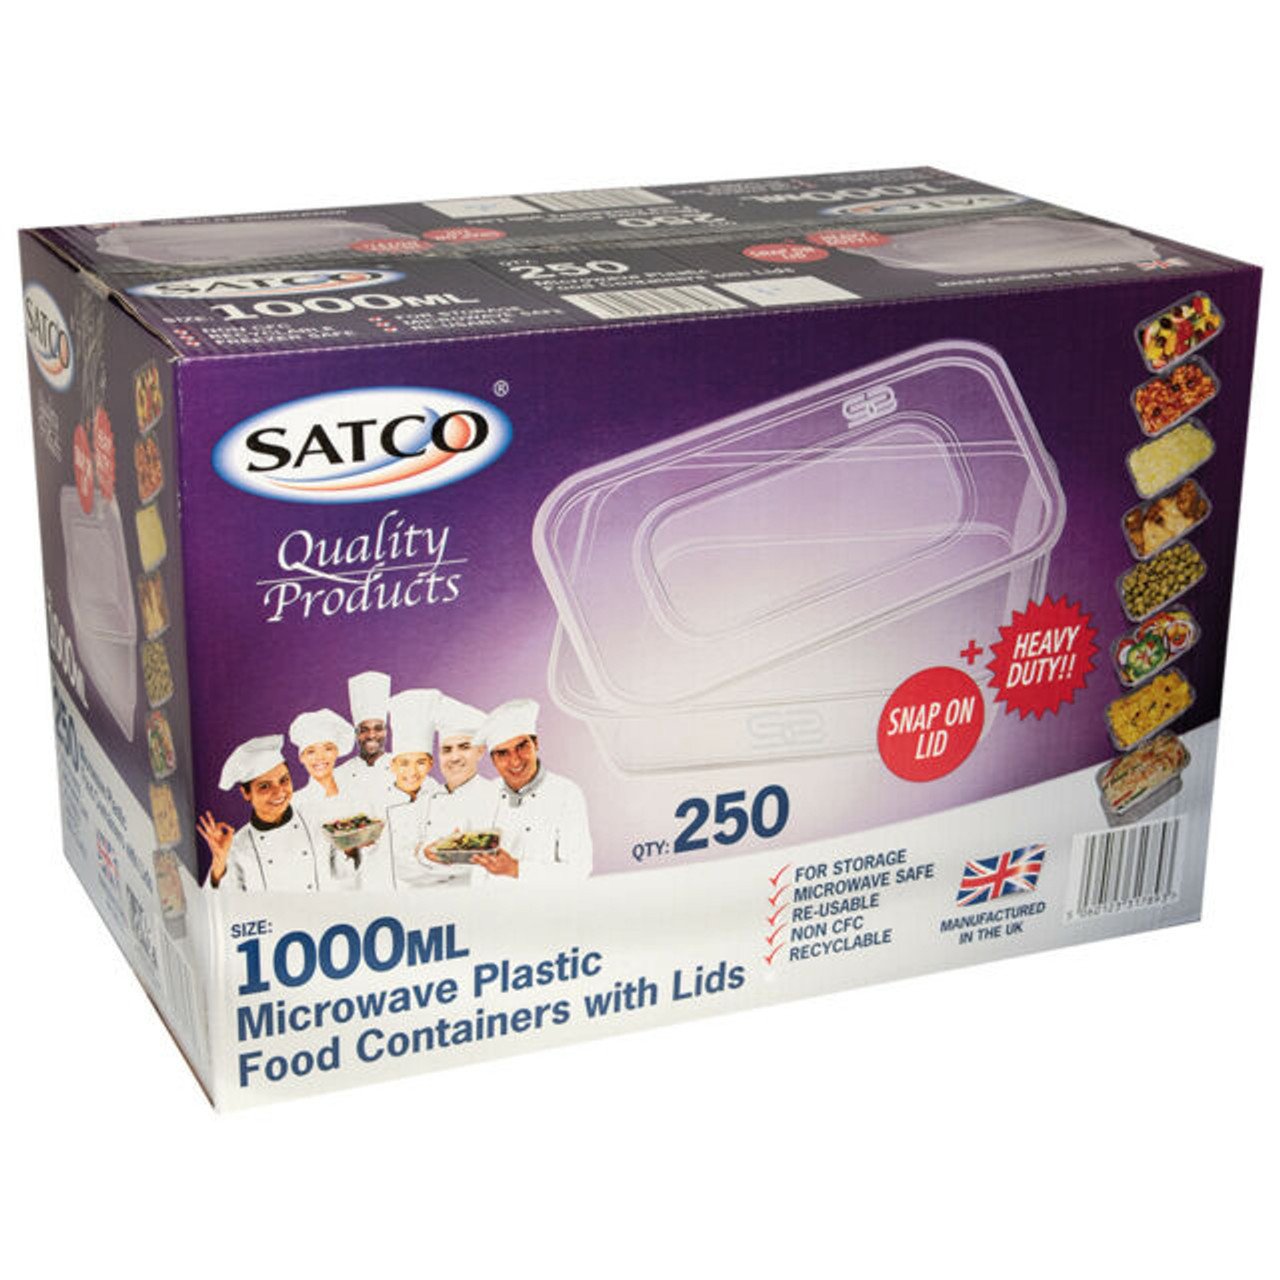 Satco 1000ml Rectangular Plastic Containers Lids Pack Size 250